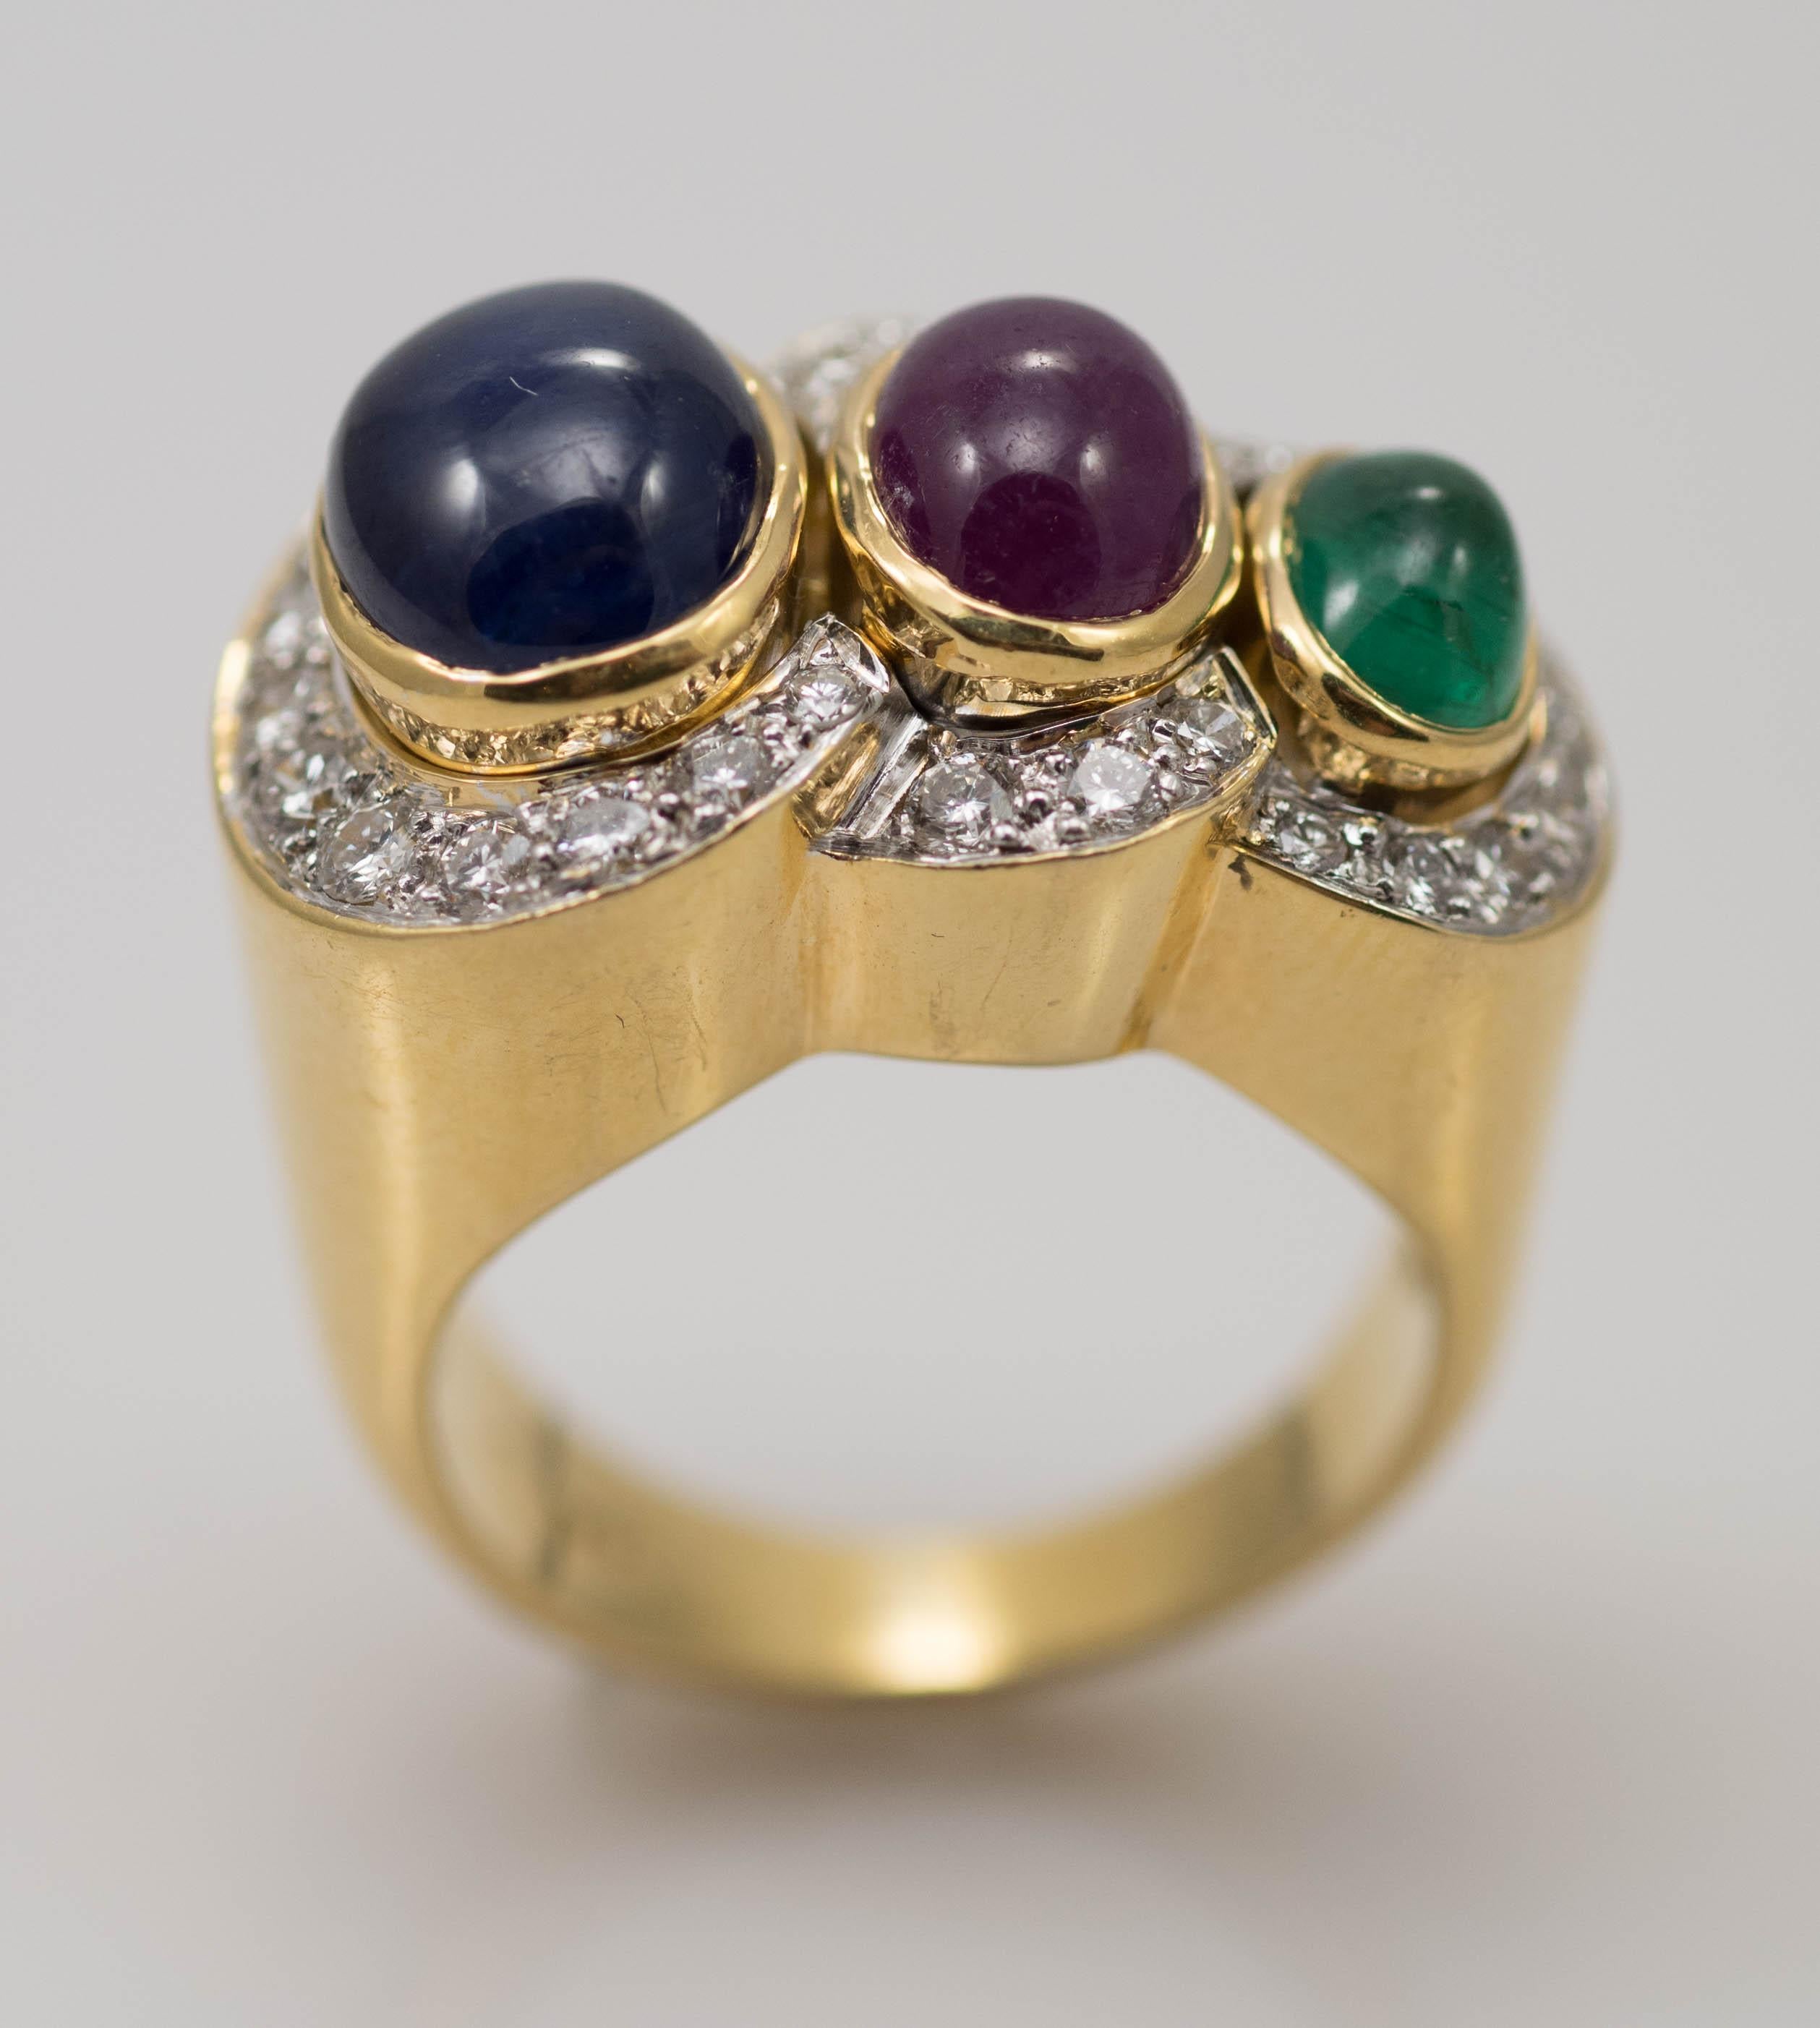 Ladies multi-stone and diamond ring in 18 karat yellow gold.
Stamped 18k and weighs 18.1 grams.
The colored stones are natural cabochon cut, 10 x 7mm blue sapphire, 8x 6mm ruby and 6.5 x 5mm emerald.
On the sides are round brilliant cut diamonds,